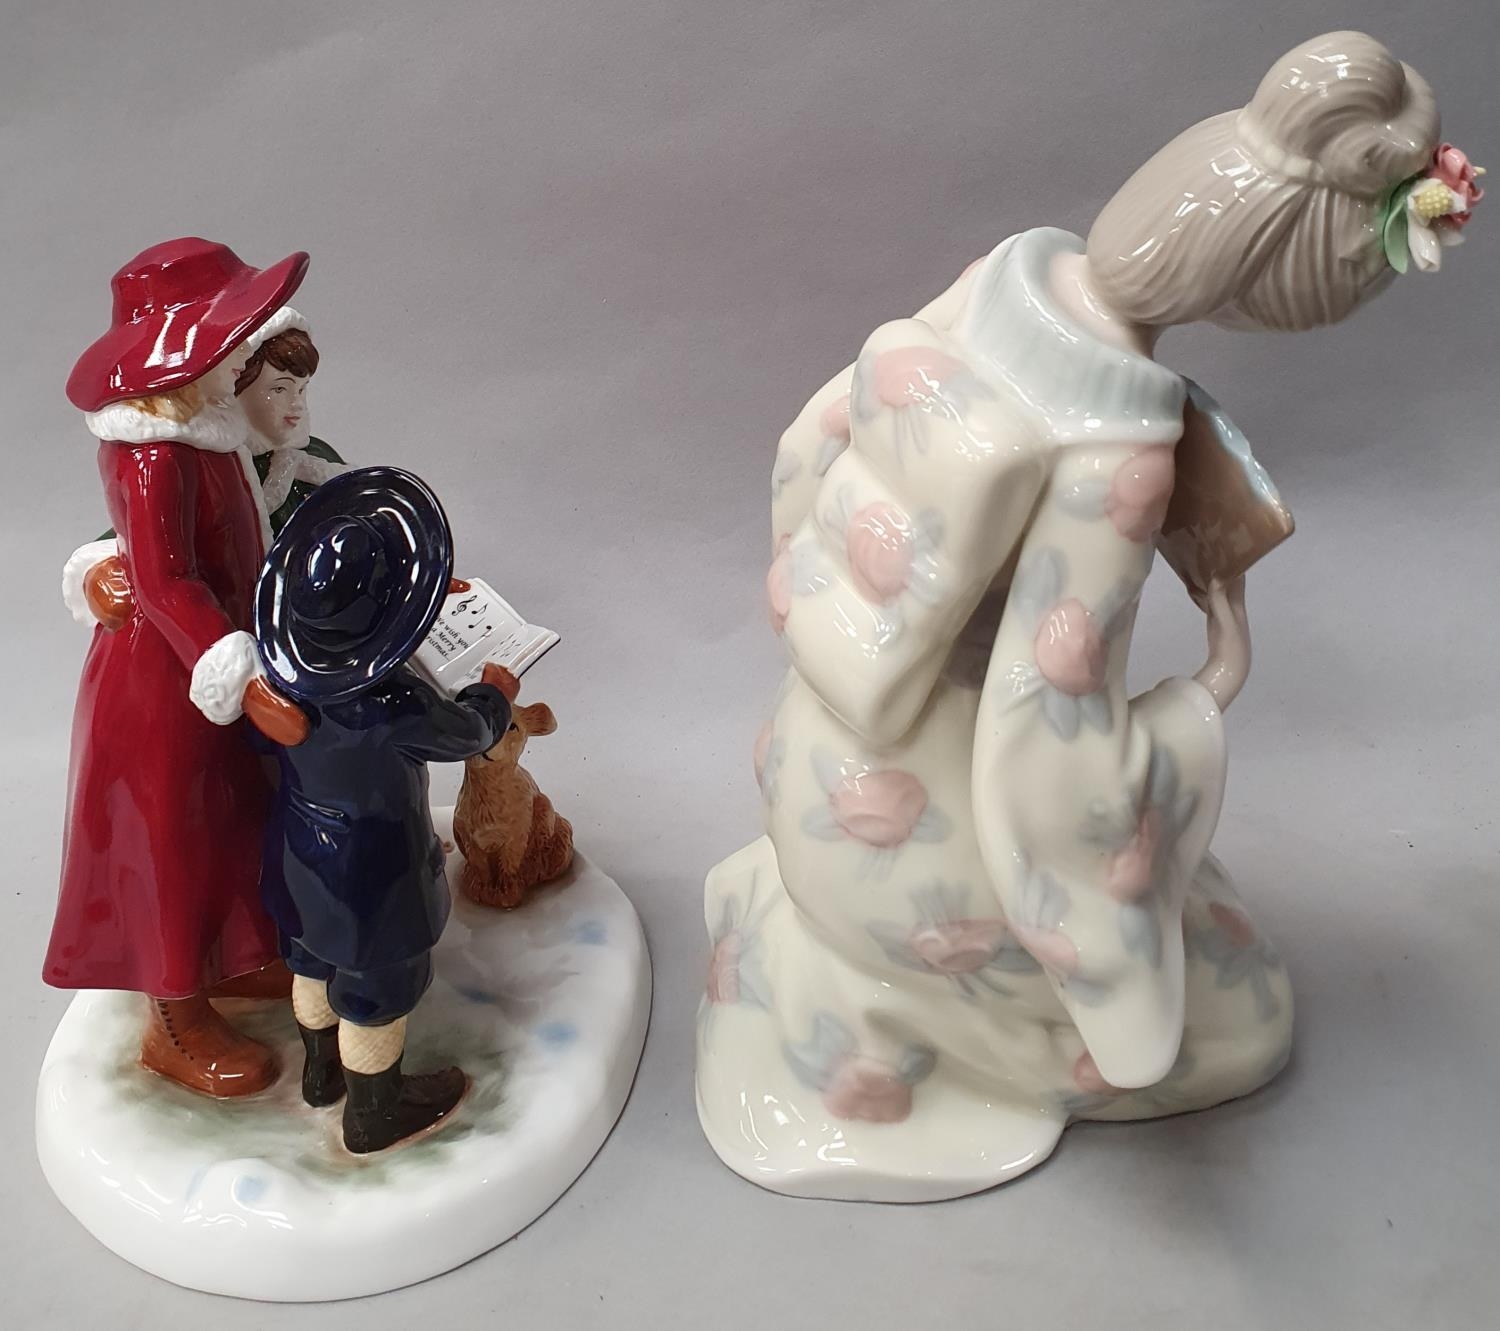 "Glad Tidings" Limited edition figurine 259/300 with certificate together with Geisha girl figurine. - Image 4 of 5